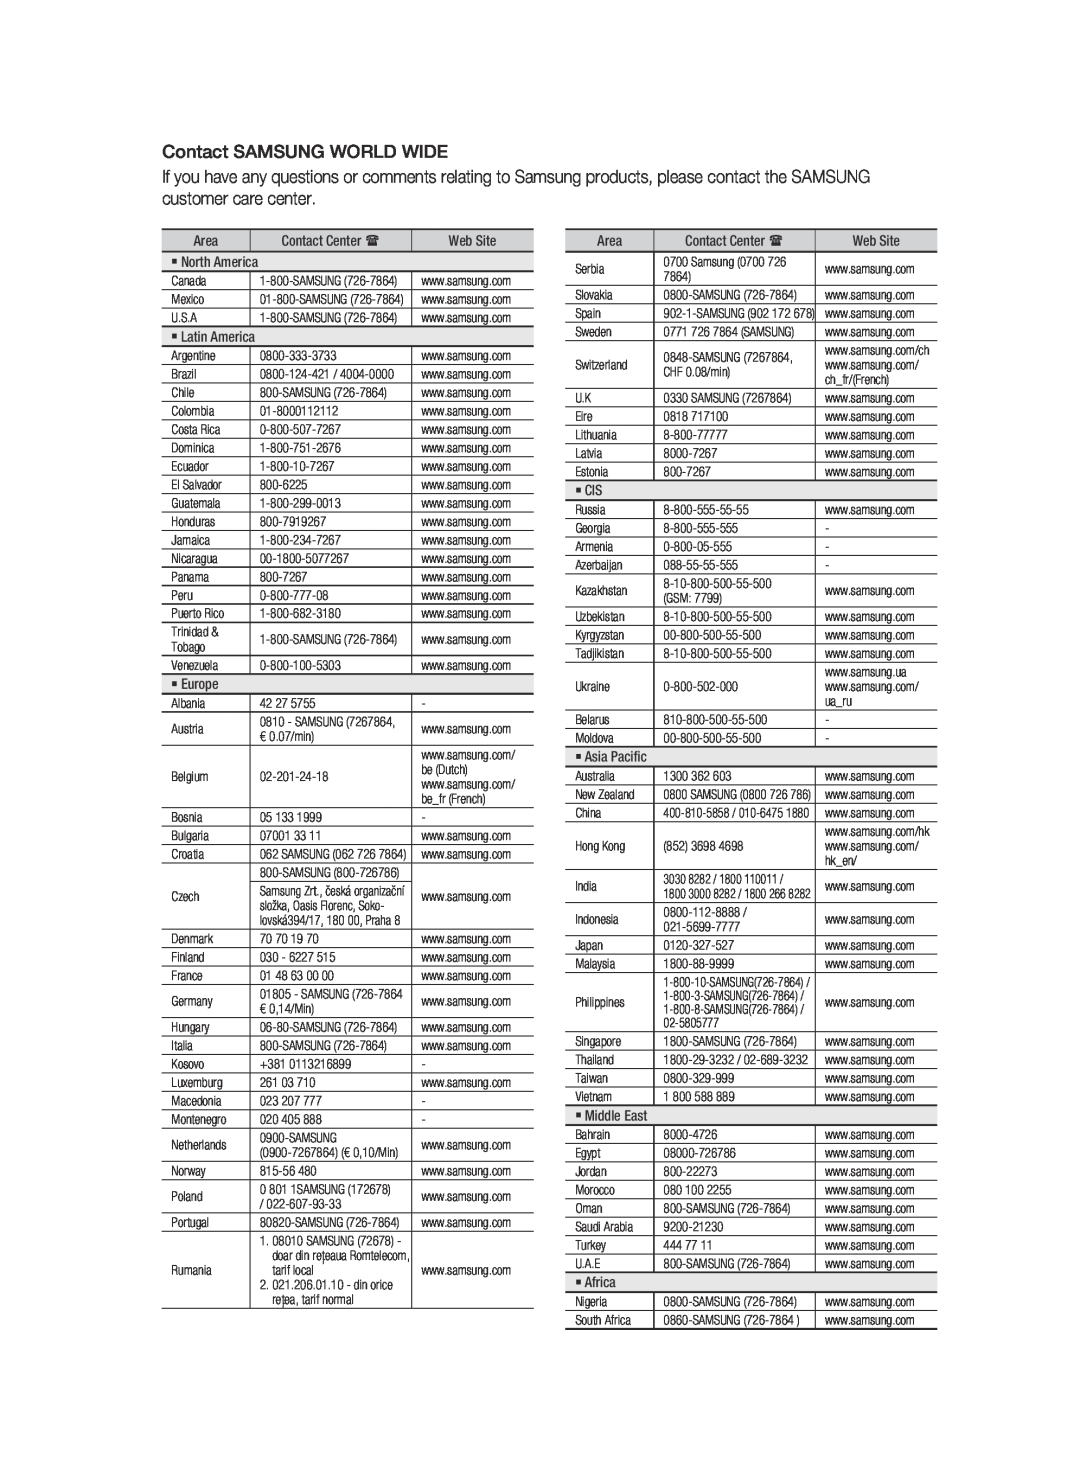 Samsung BD-D6500 user manual Contact SAMSUNG WORLD WIDE, Area, Web Site, ` Europe, ` Cis, ` Africa 